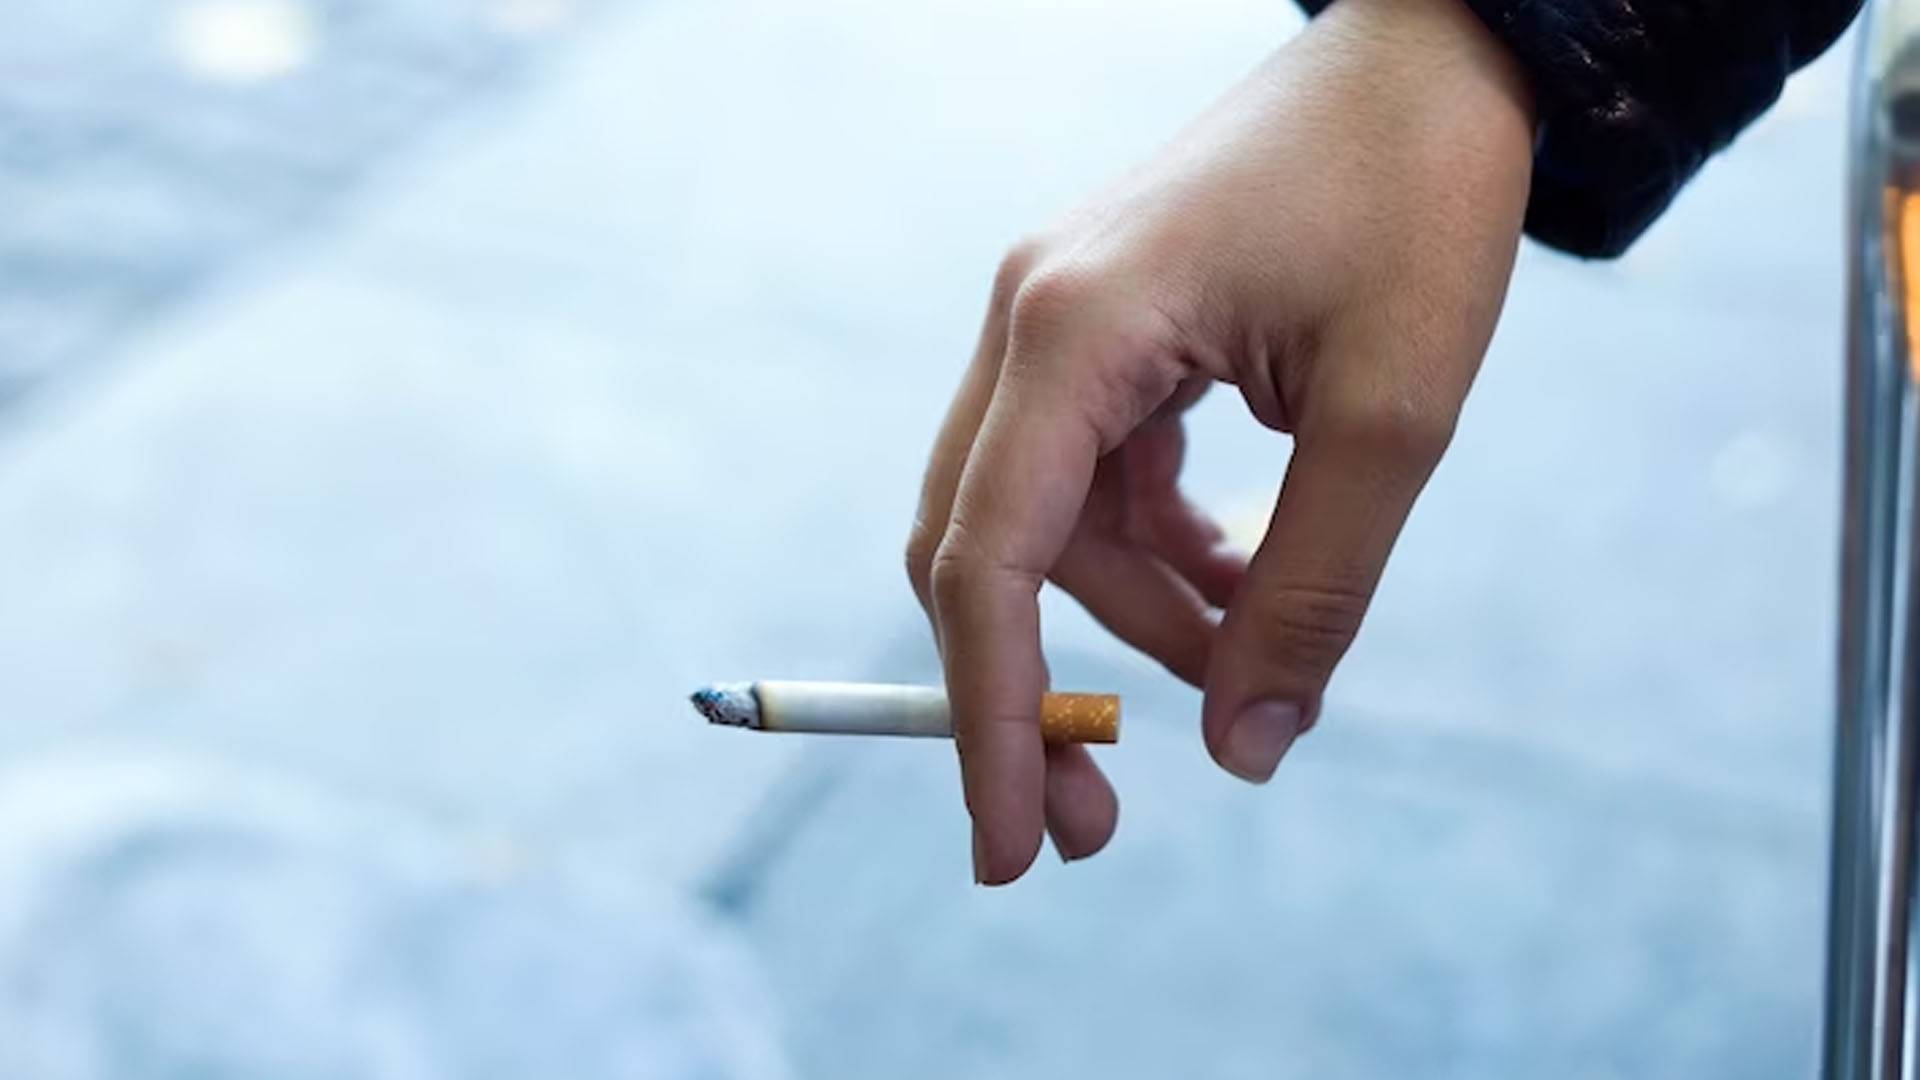 Are There Any Health Benefits Of Smoking?